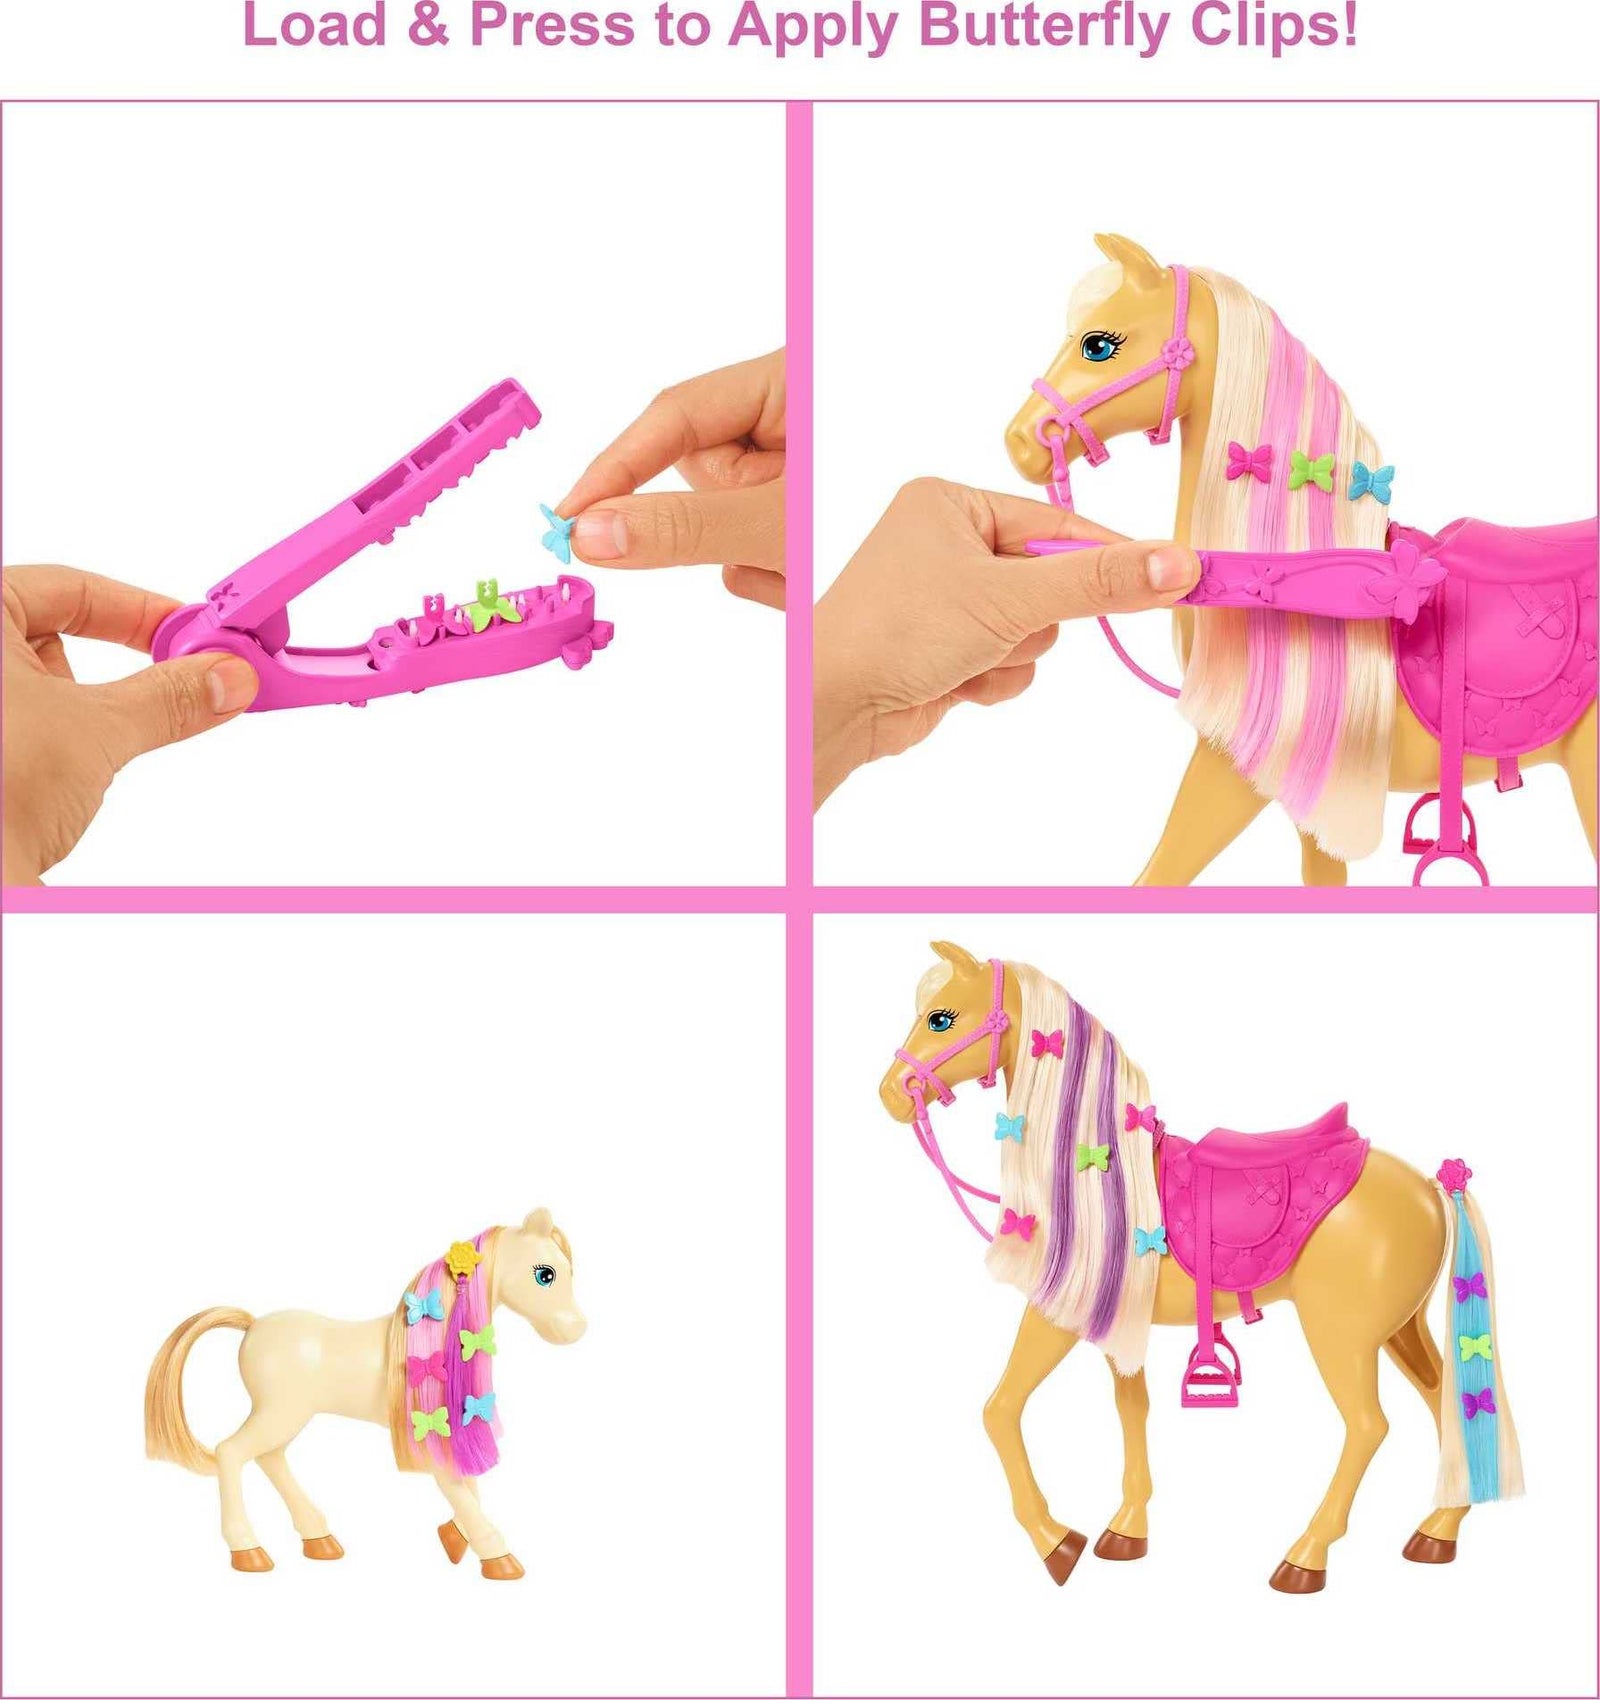 Barbie Groom 'n Care Horses Playset Doll (Blonde 11.5-in), 2 Horses & 20+ Grooming and Hairstyling Accessories, Gift for 3 to 7 Year Olds [Amazon Exclusive]